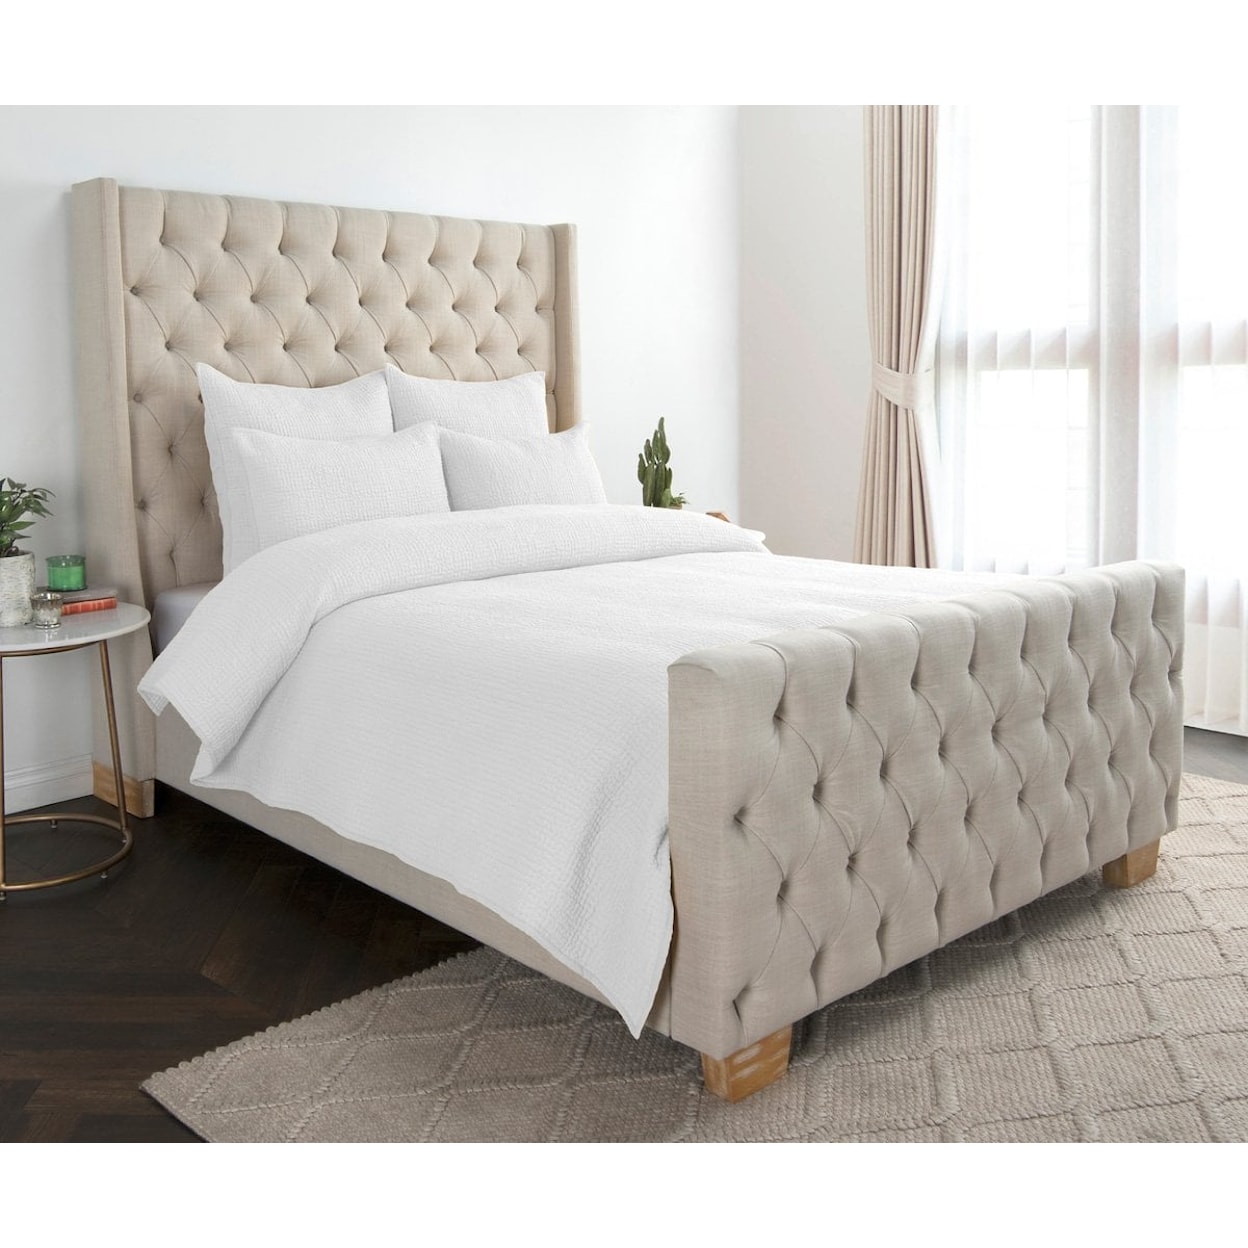 Classic Home Bedding DANICA WHITE KING QUILT